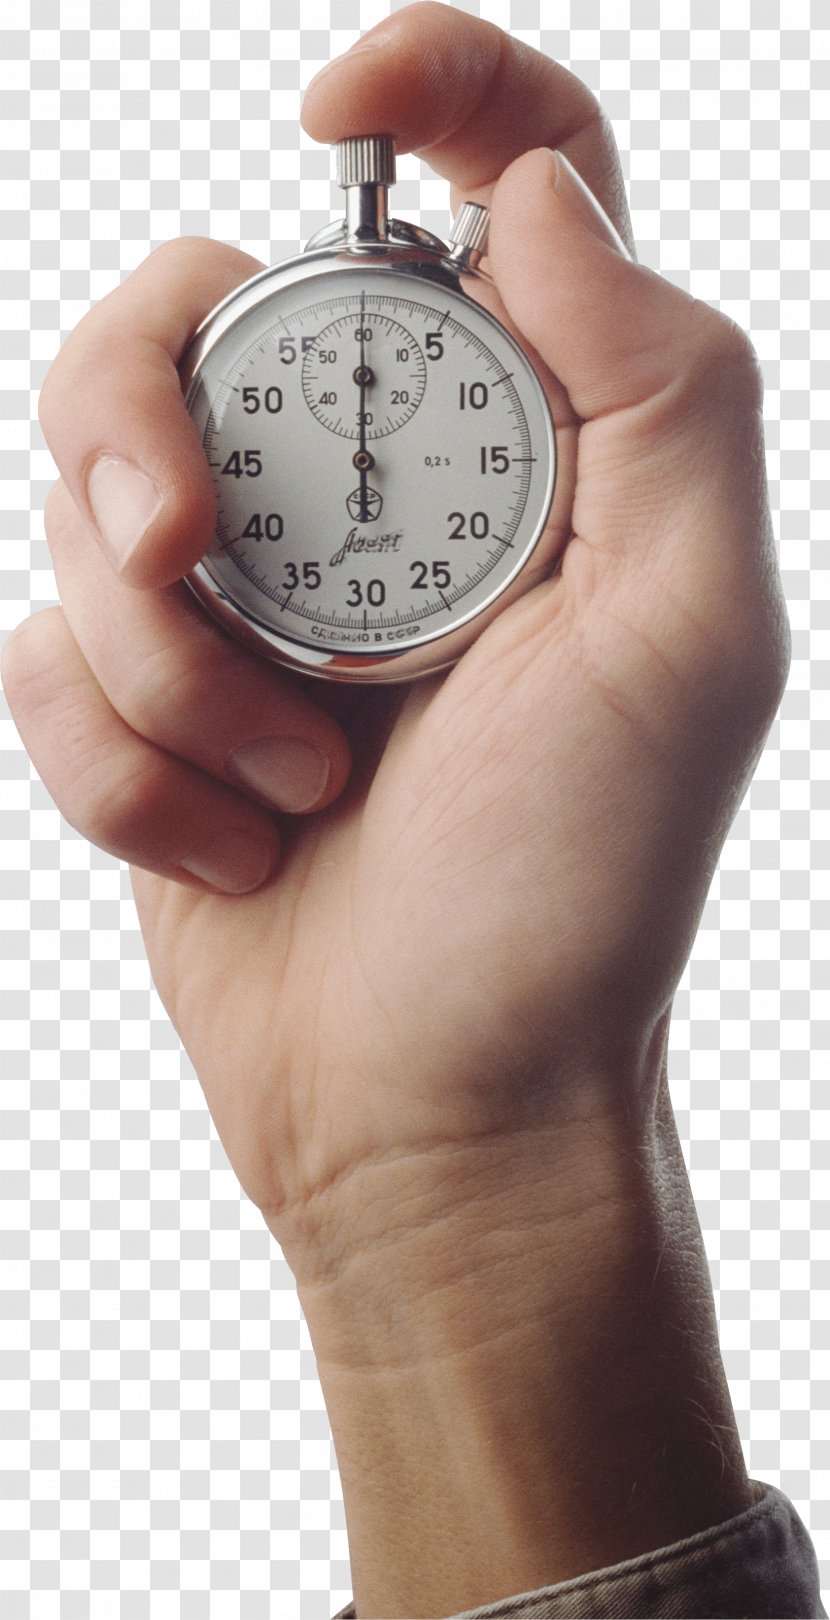 The International Consumer Electronics Show Dash Cyprus Securities And Exchange Commission Meeting Cryptocurrency - Timer - Stopwatch In Hand Image Transparent PNG